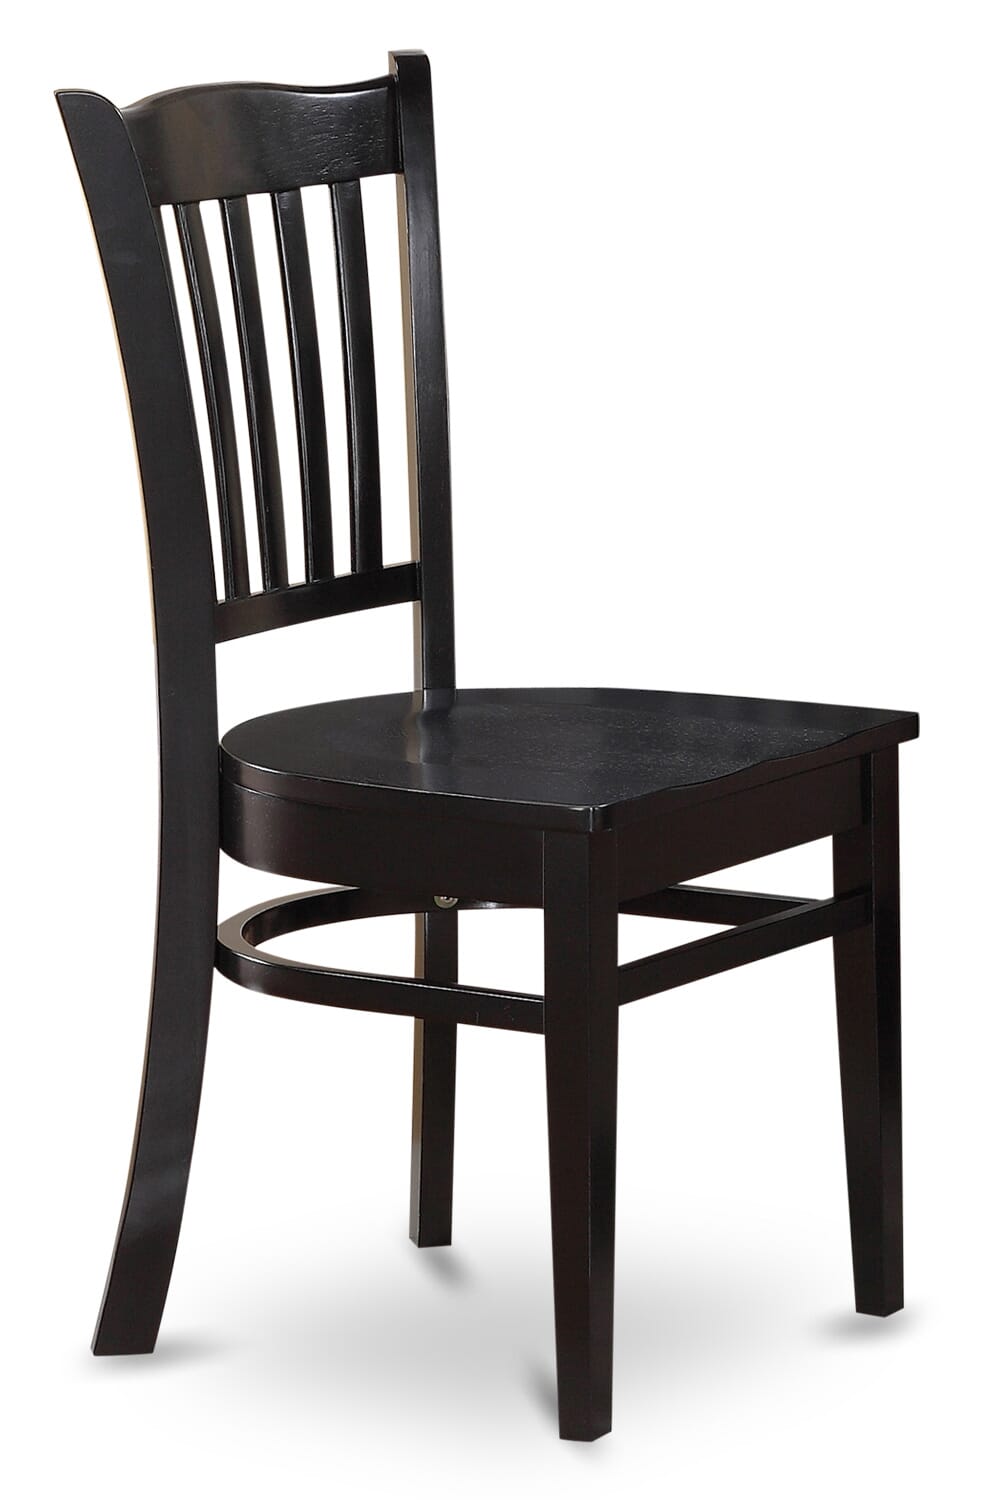 East West Furniture AMGR5-BCH-W 5 Piece Modern Dining Table Set Includes a Round Kitchen Table with Pedestal and 4 Kitchen Dining Chairs, 36x36 Inch, Black & Cherry